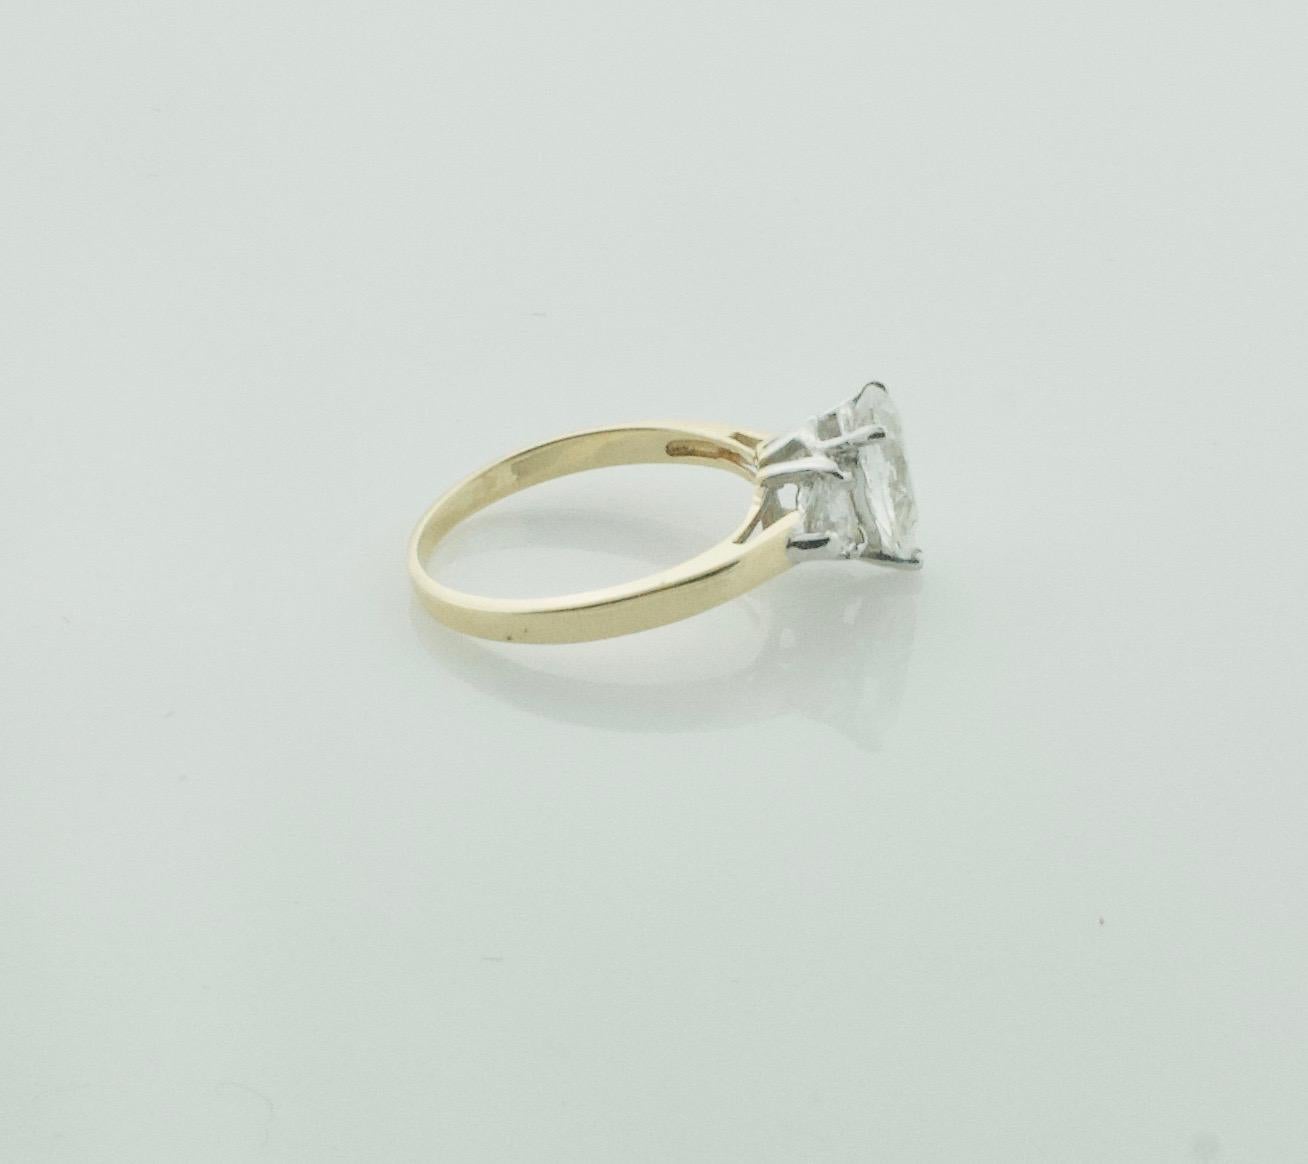 Pear Shape Diamond Engagement Ring 1.23 Carats GIA GVS2 in 18k Gold
A Lovely Two Tone Design
One Pear Shape Diamond Weighing 1.23 its. GIA Certified G VS2
Two Trilliant Cut Diamonds Weighing .60 carats approximately   [G VS]